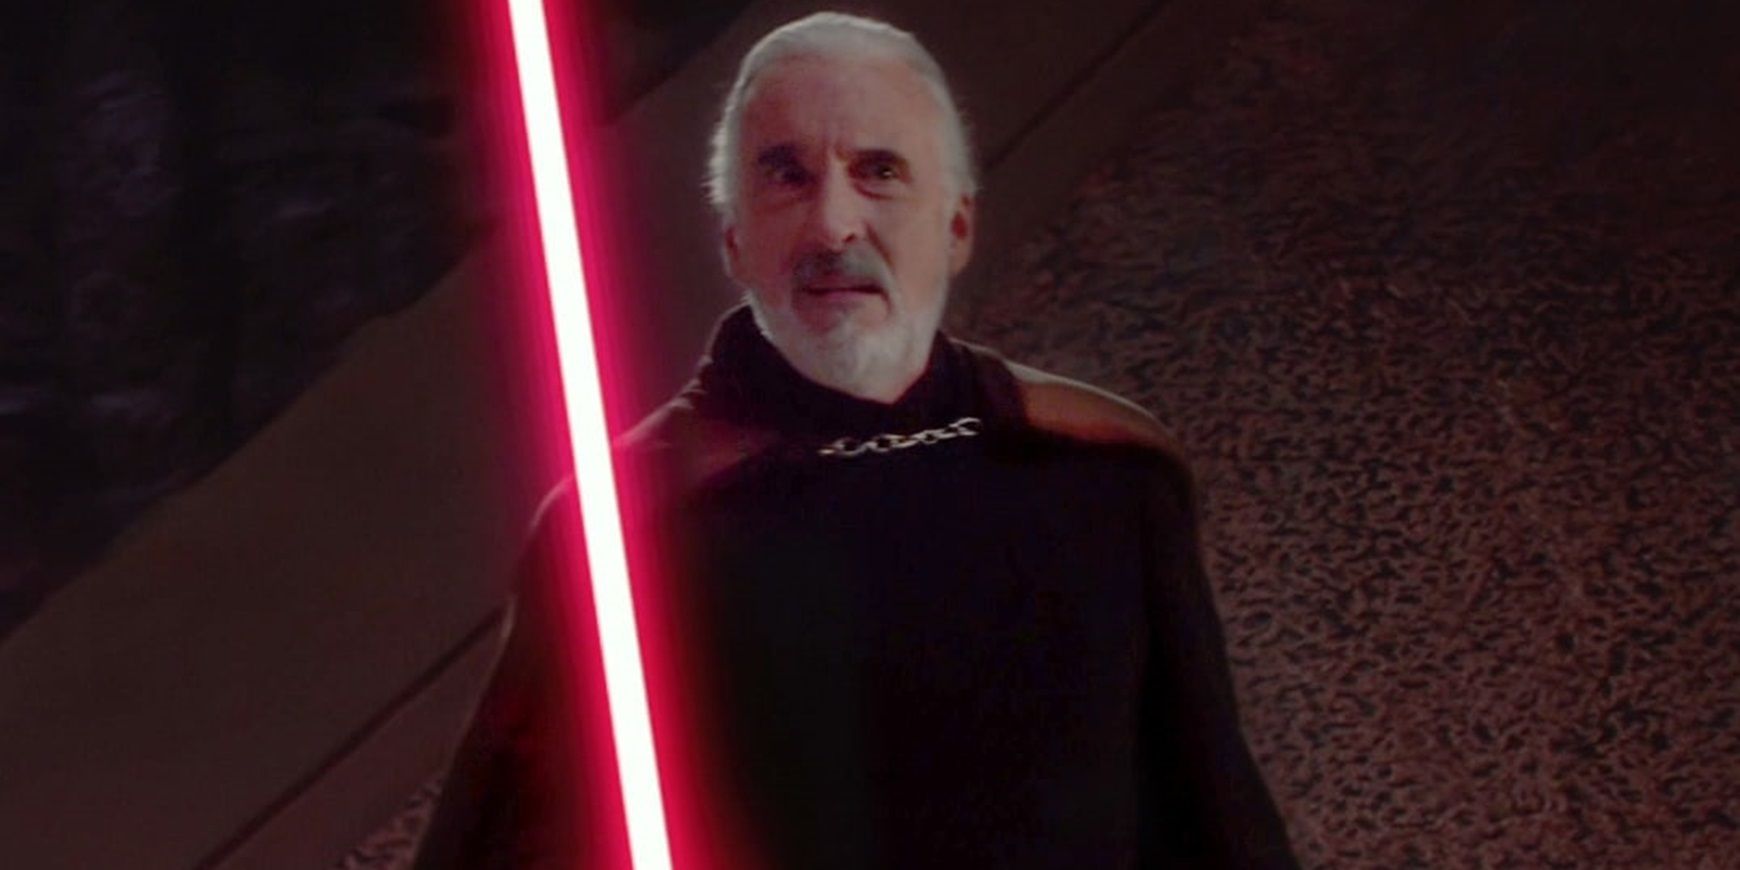 Count Dooku with a lightsaber in Attack of the Clones.